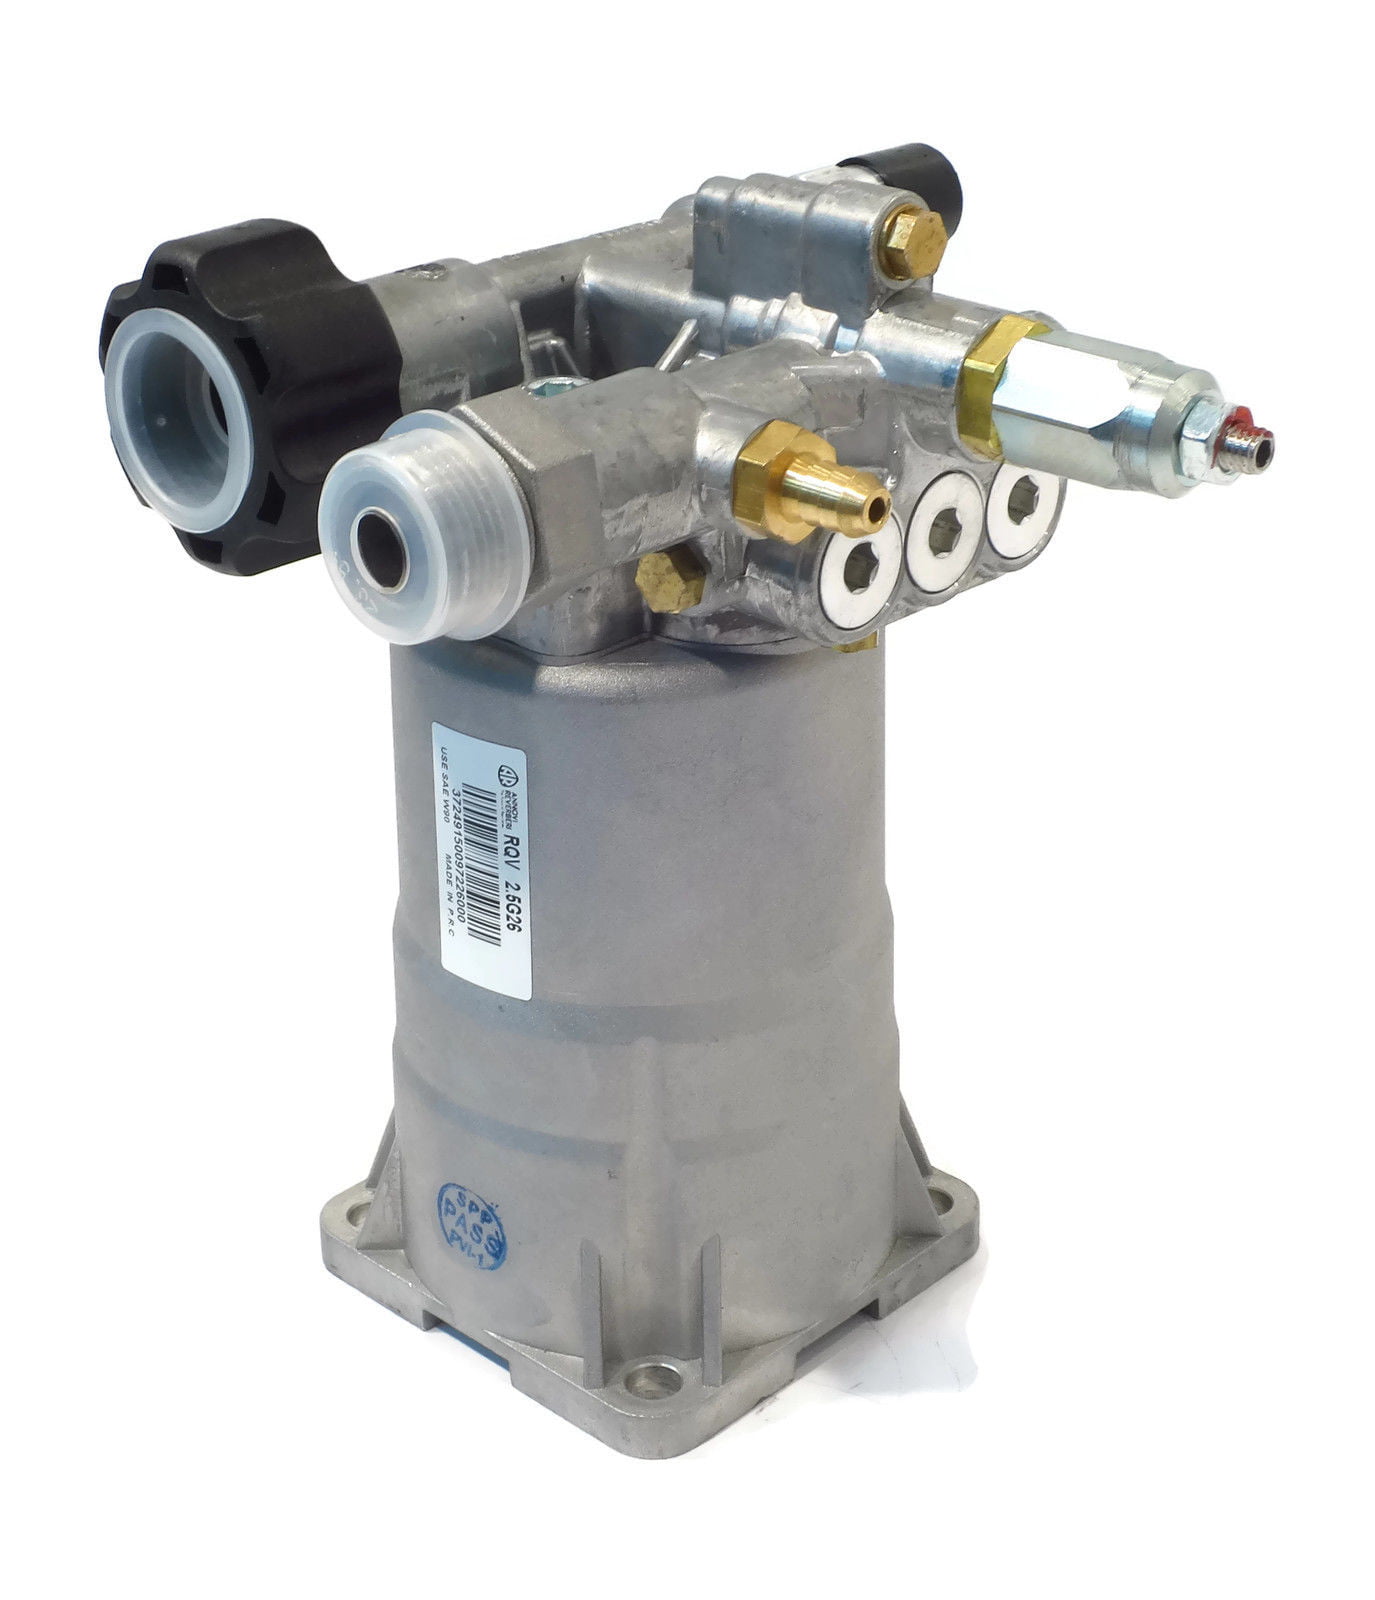 New 2600 psi POWER PRESSURE WASHER WATER PUMP For HONDA units 